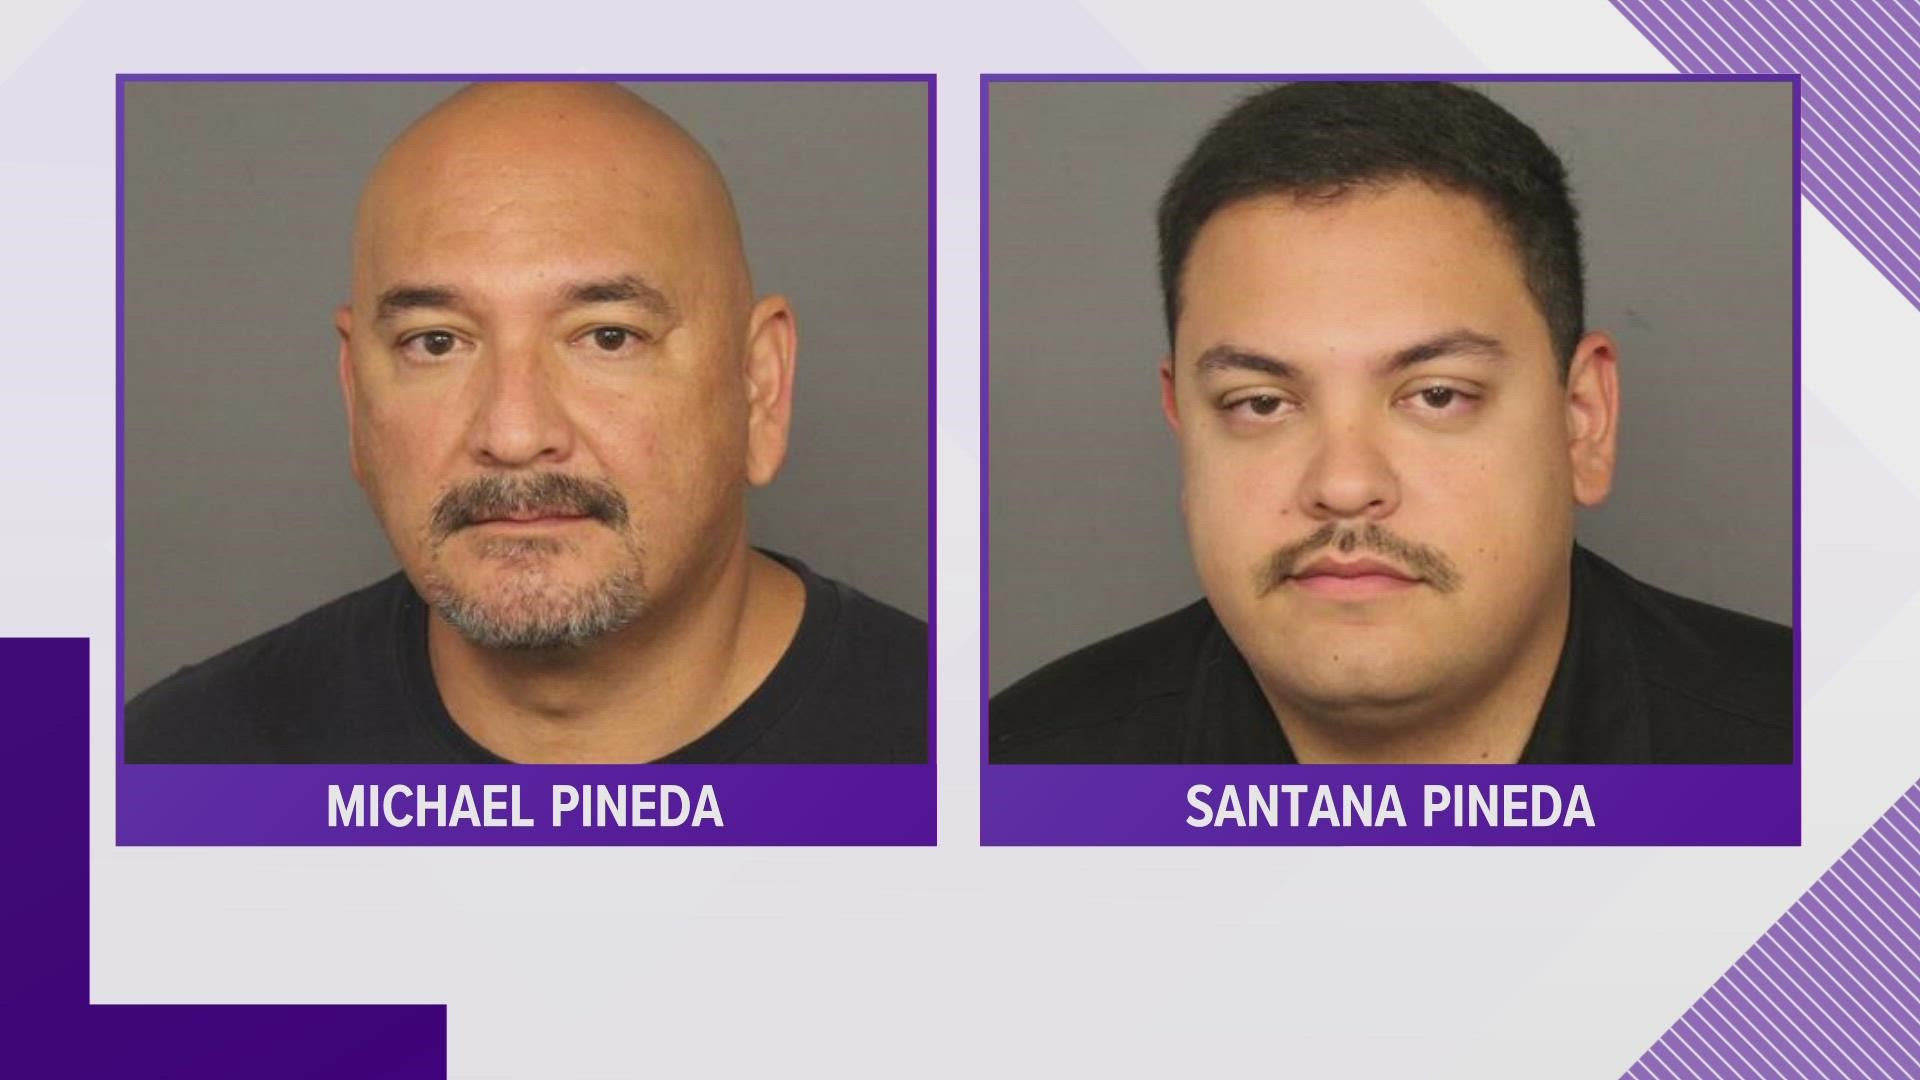 The father and son officers, Michael Pineda and Santana Pineda, were charged with one count each, according to the District Attorney's Office.